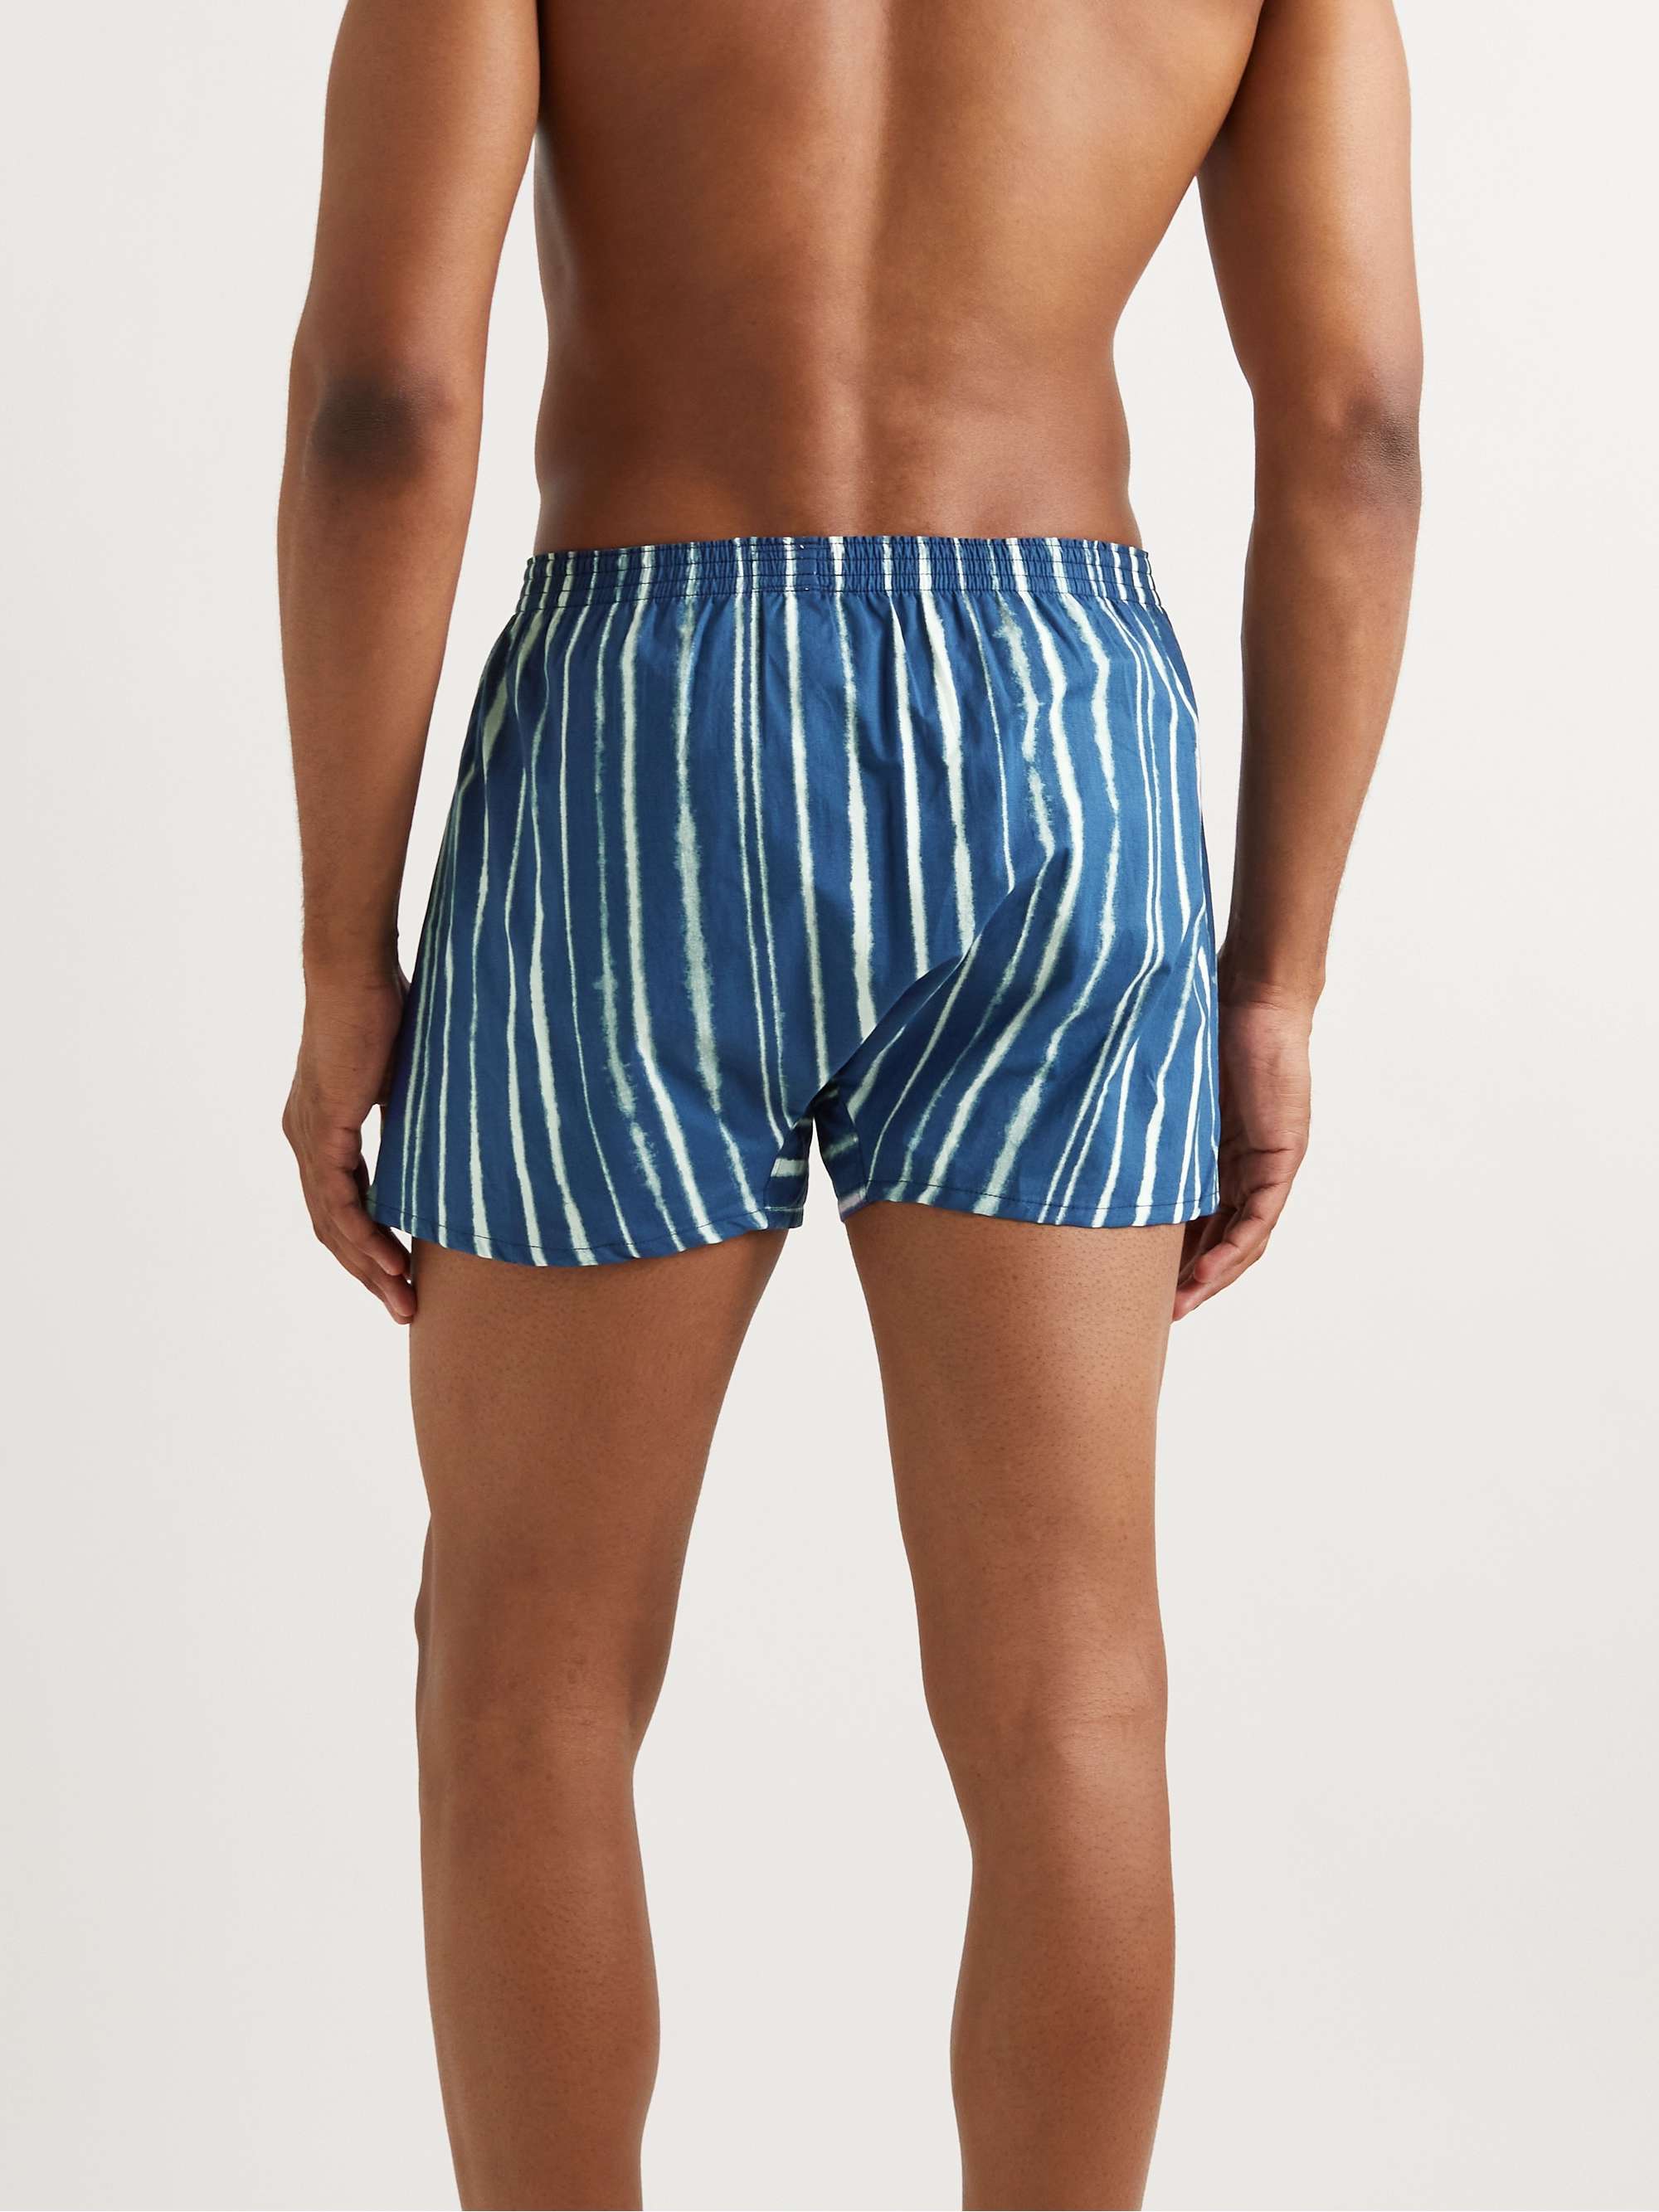 ANONYMOUS ISM Slim-Fit Striped Cotton Boxer Shorts